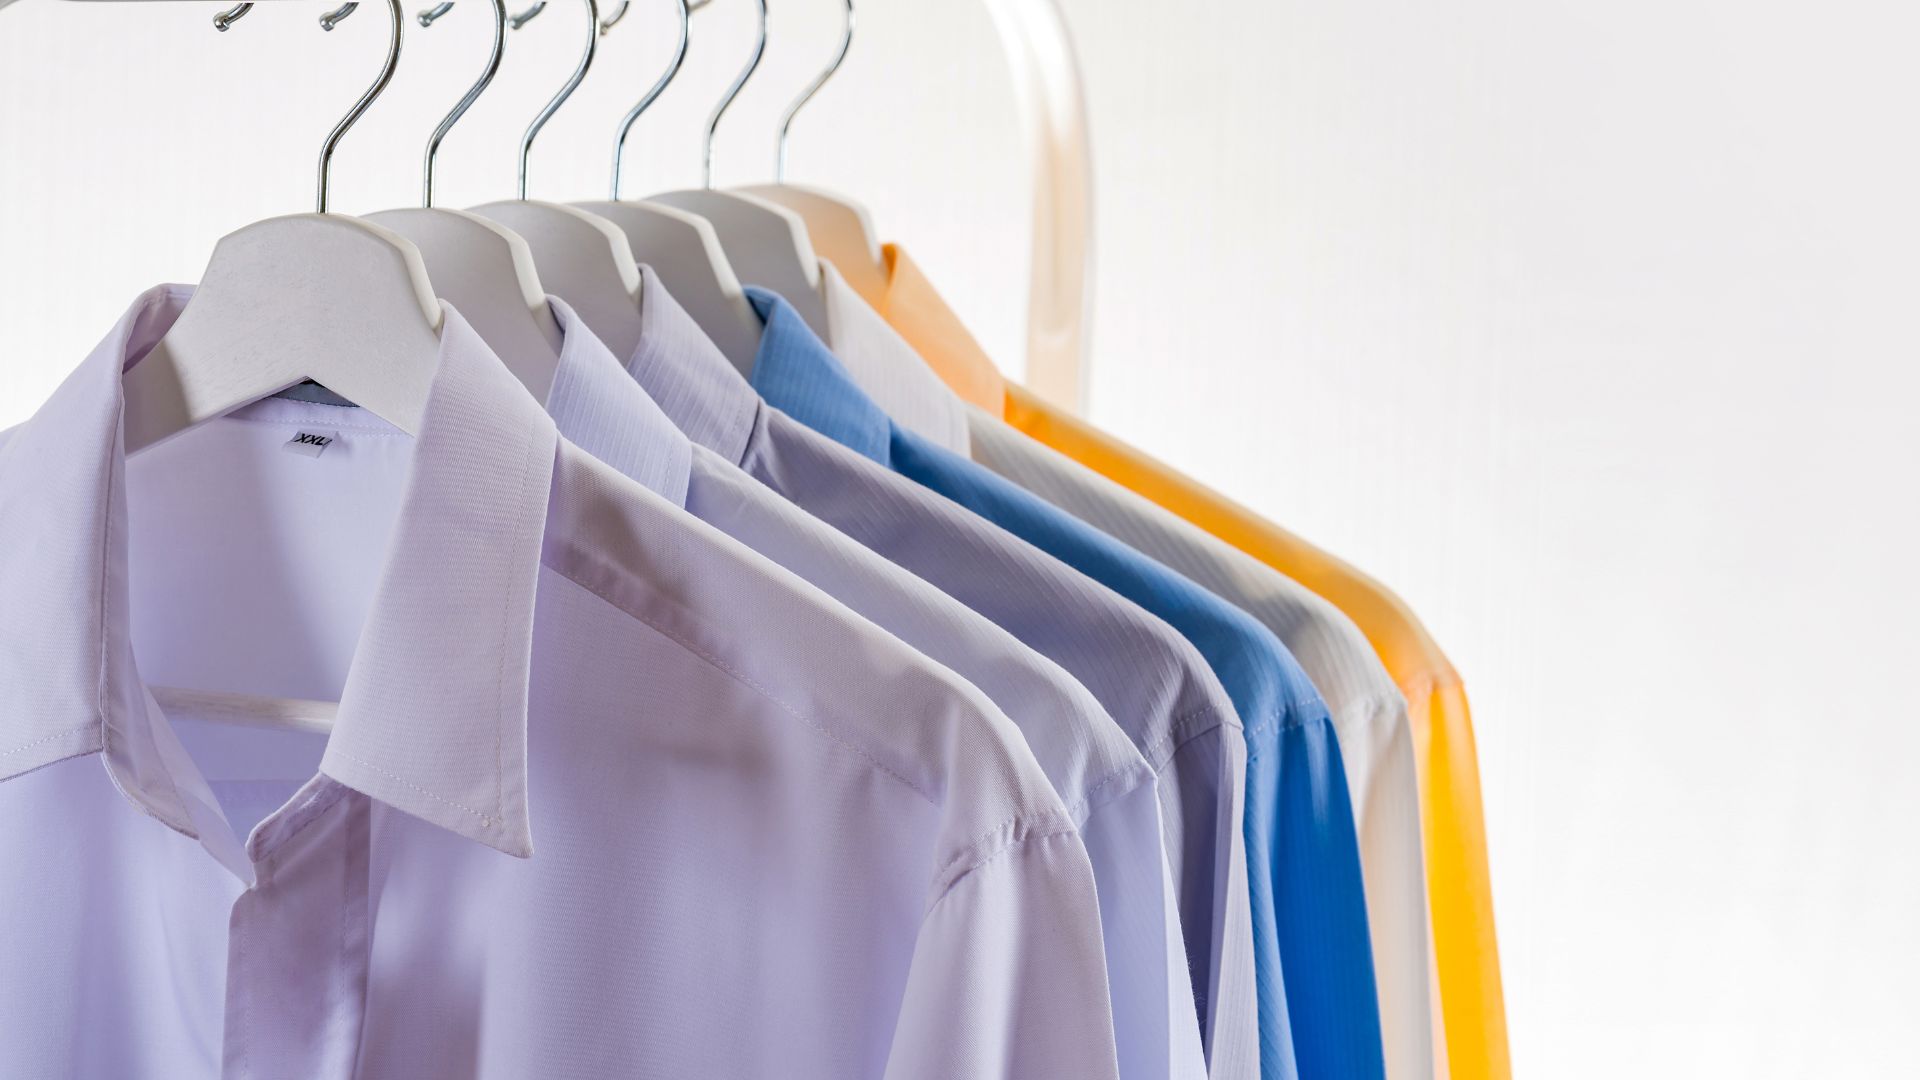 Hangers with formal shirts on rack